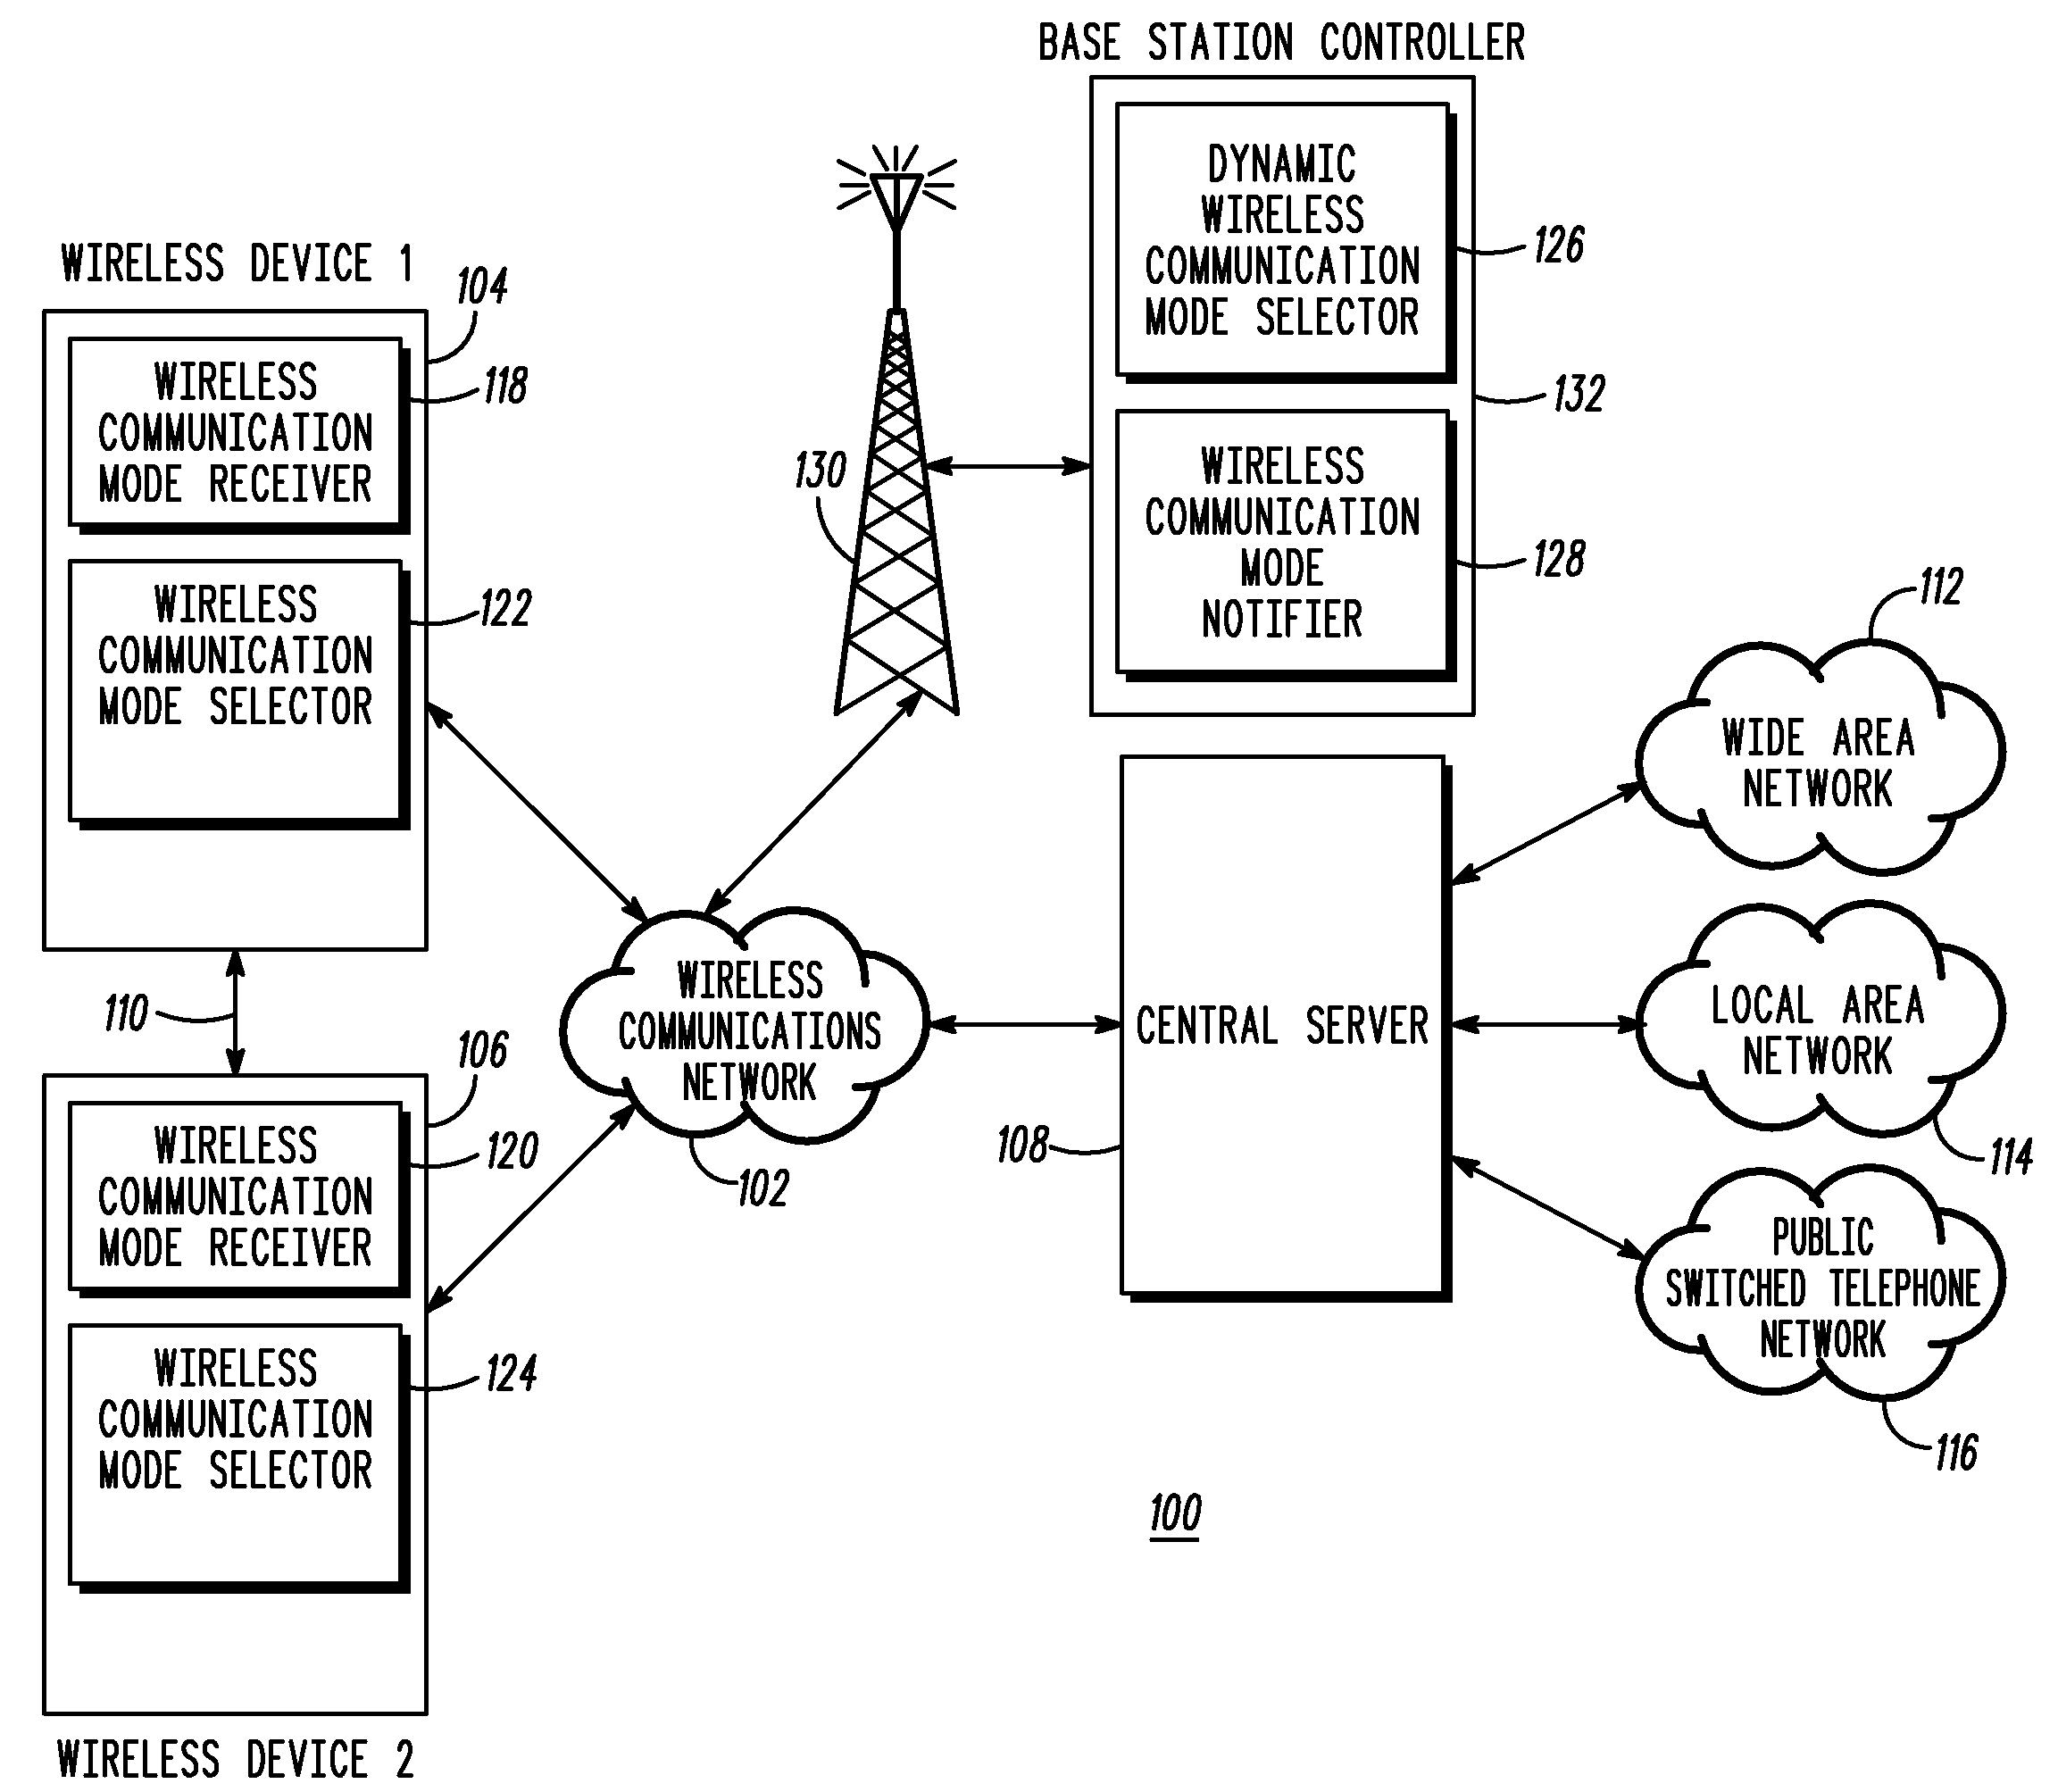 Dynamic selection of wireless information communication modes for a wireless communication device